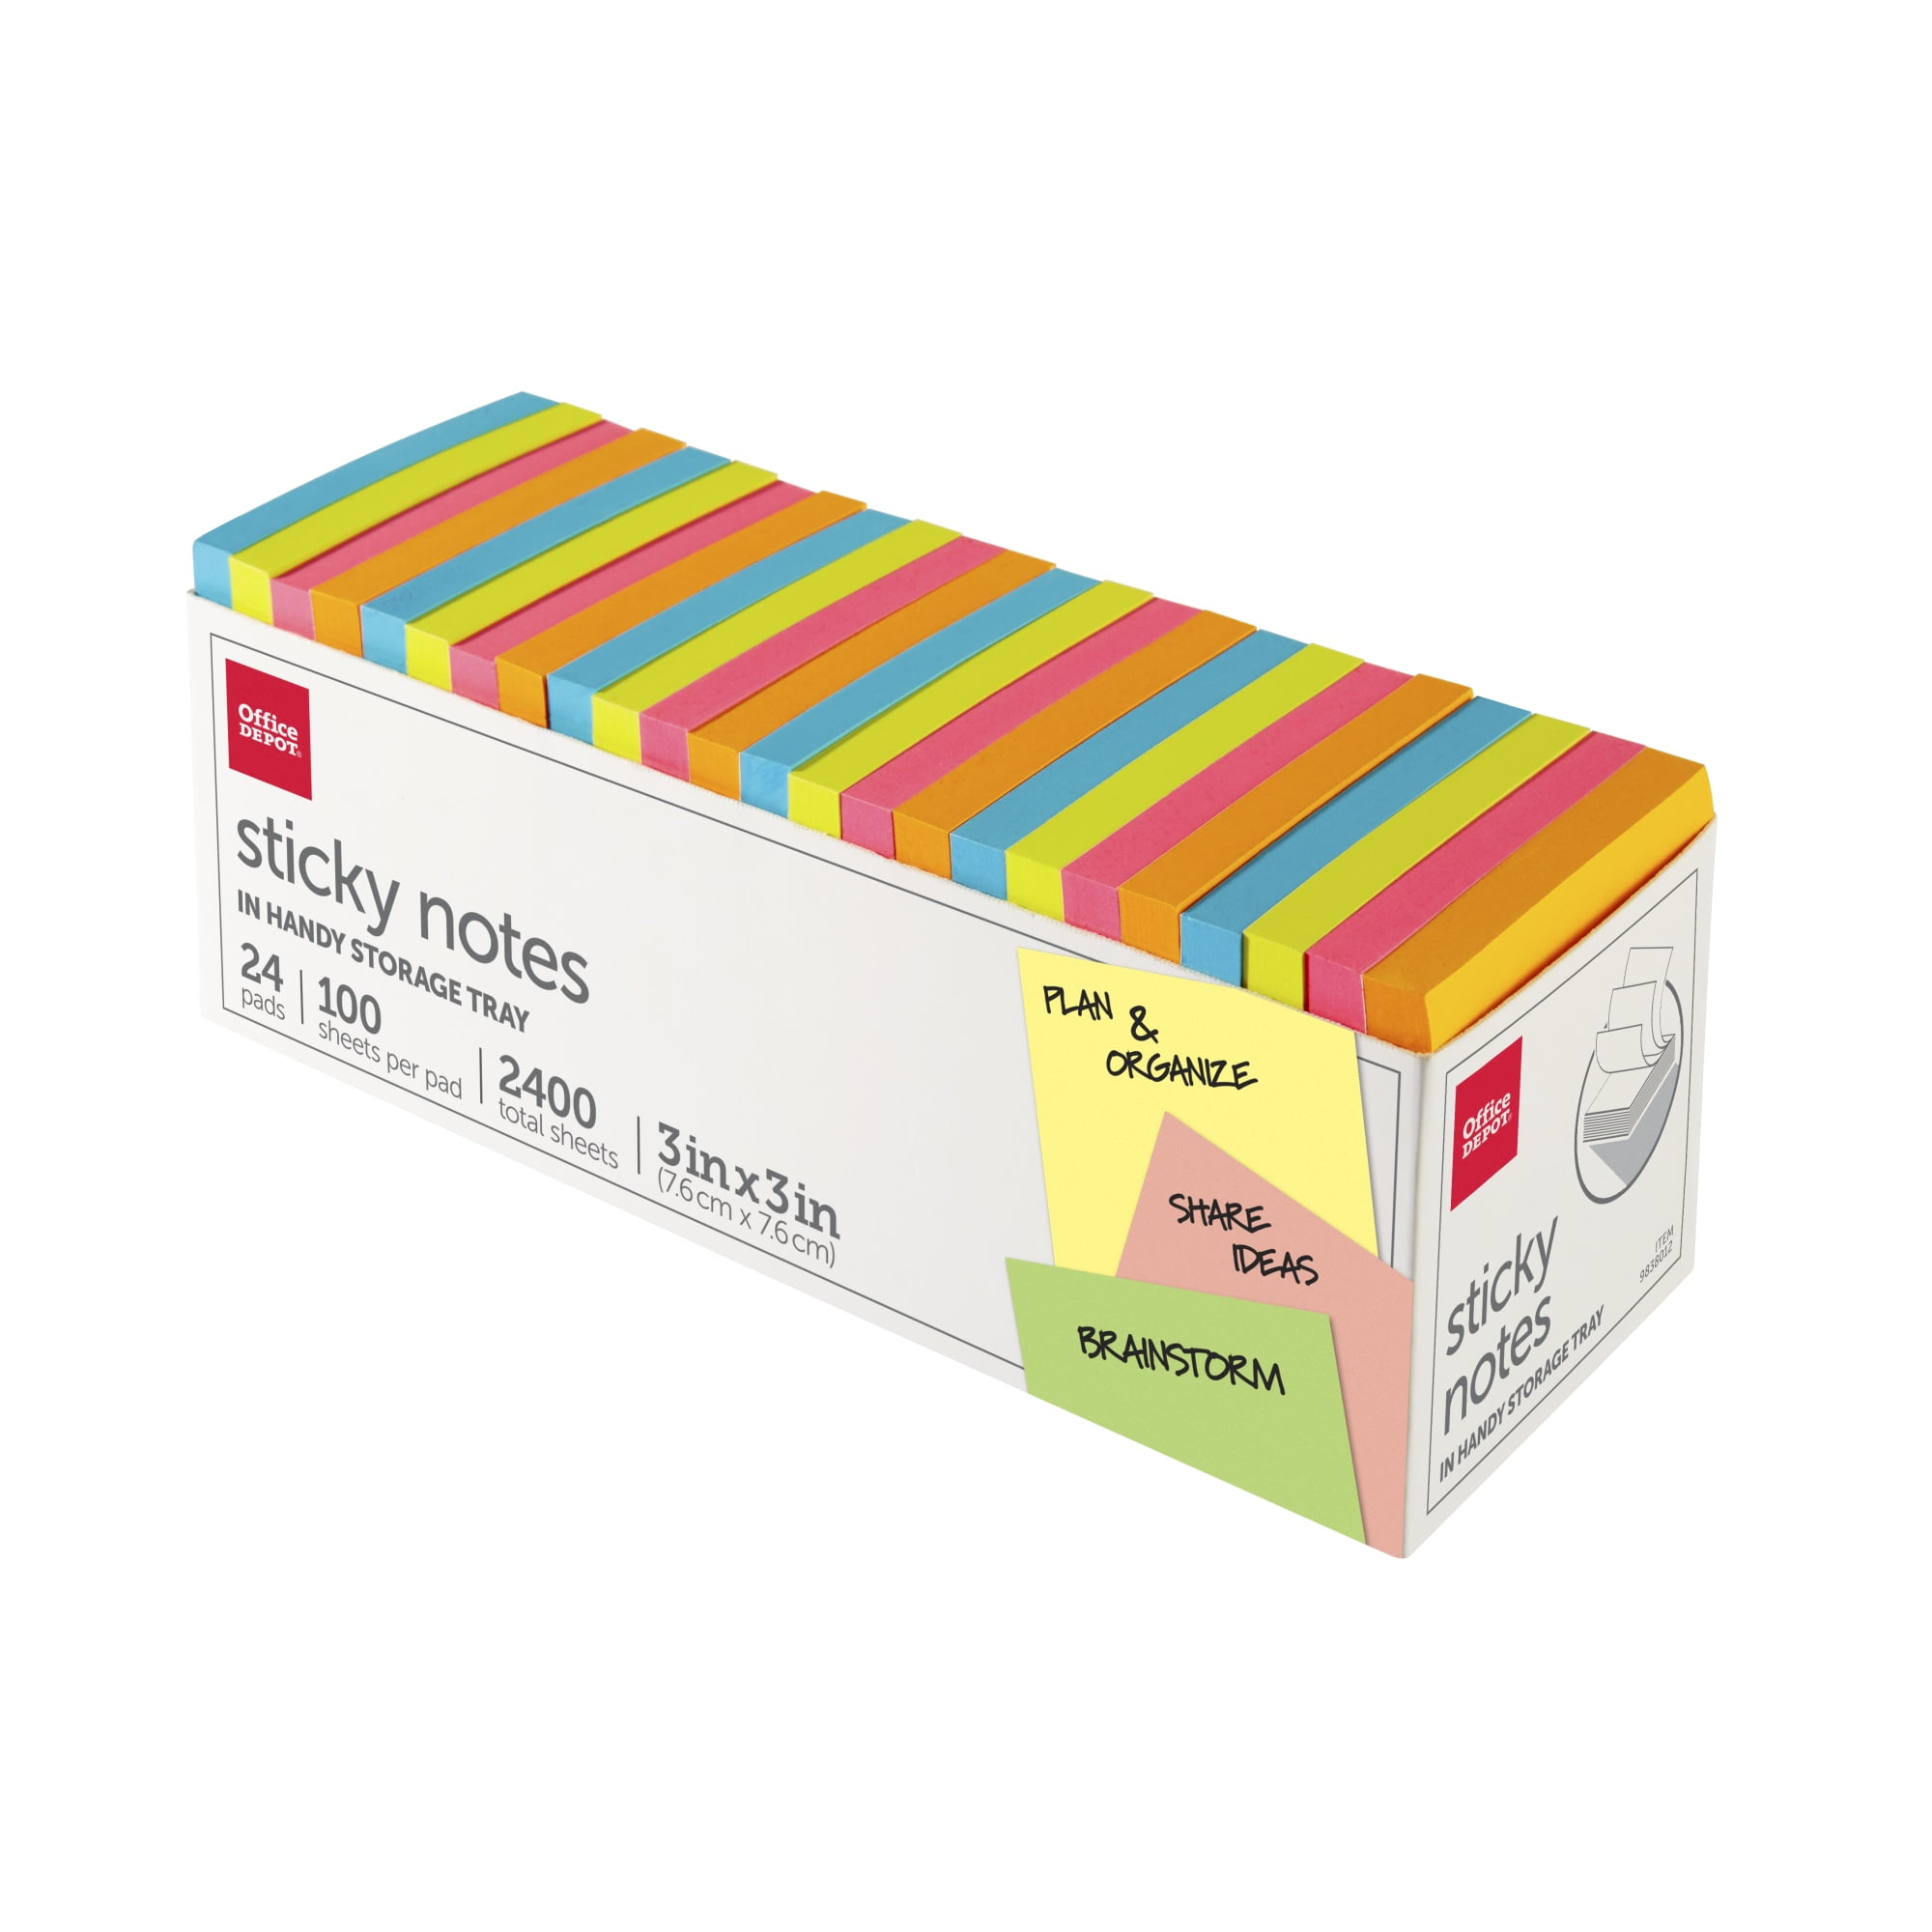 Seajan 80 Pack 2400 Sheets Lined Sticky Notes 4x6 and 3x3 In Pastel Ruled  Post Stickies